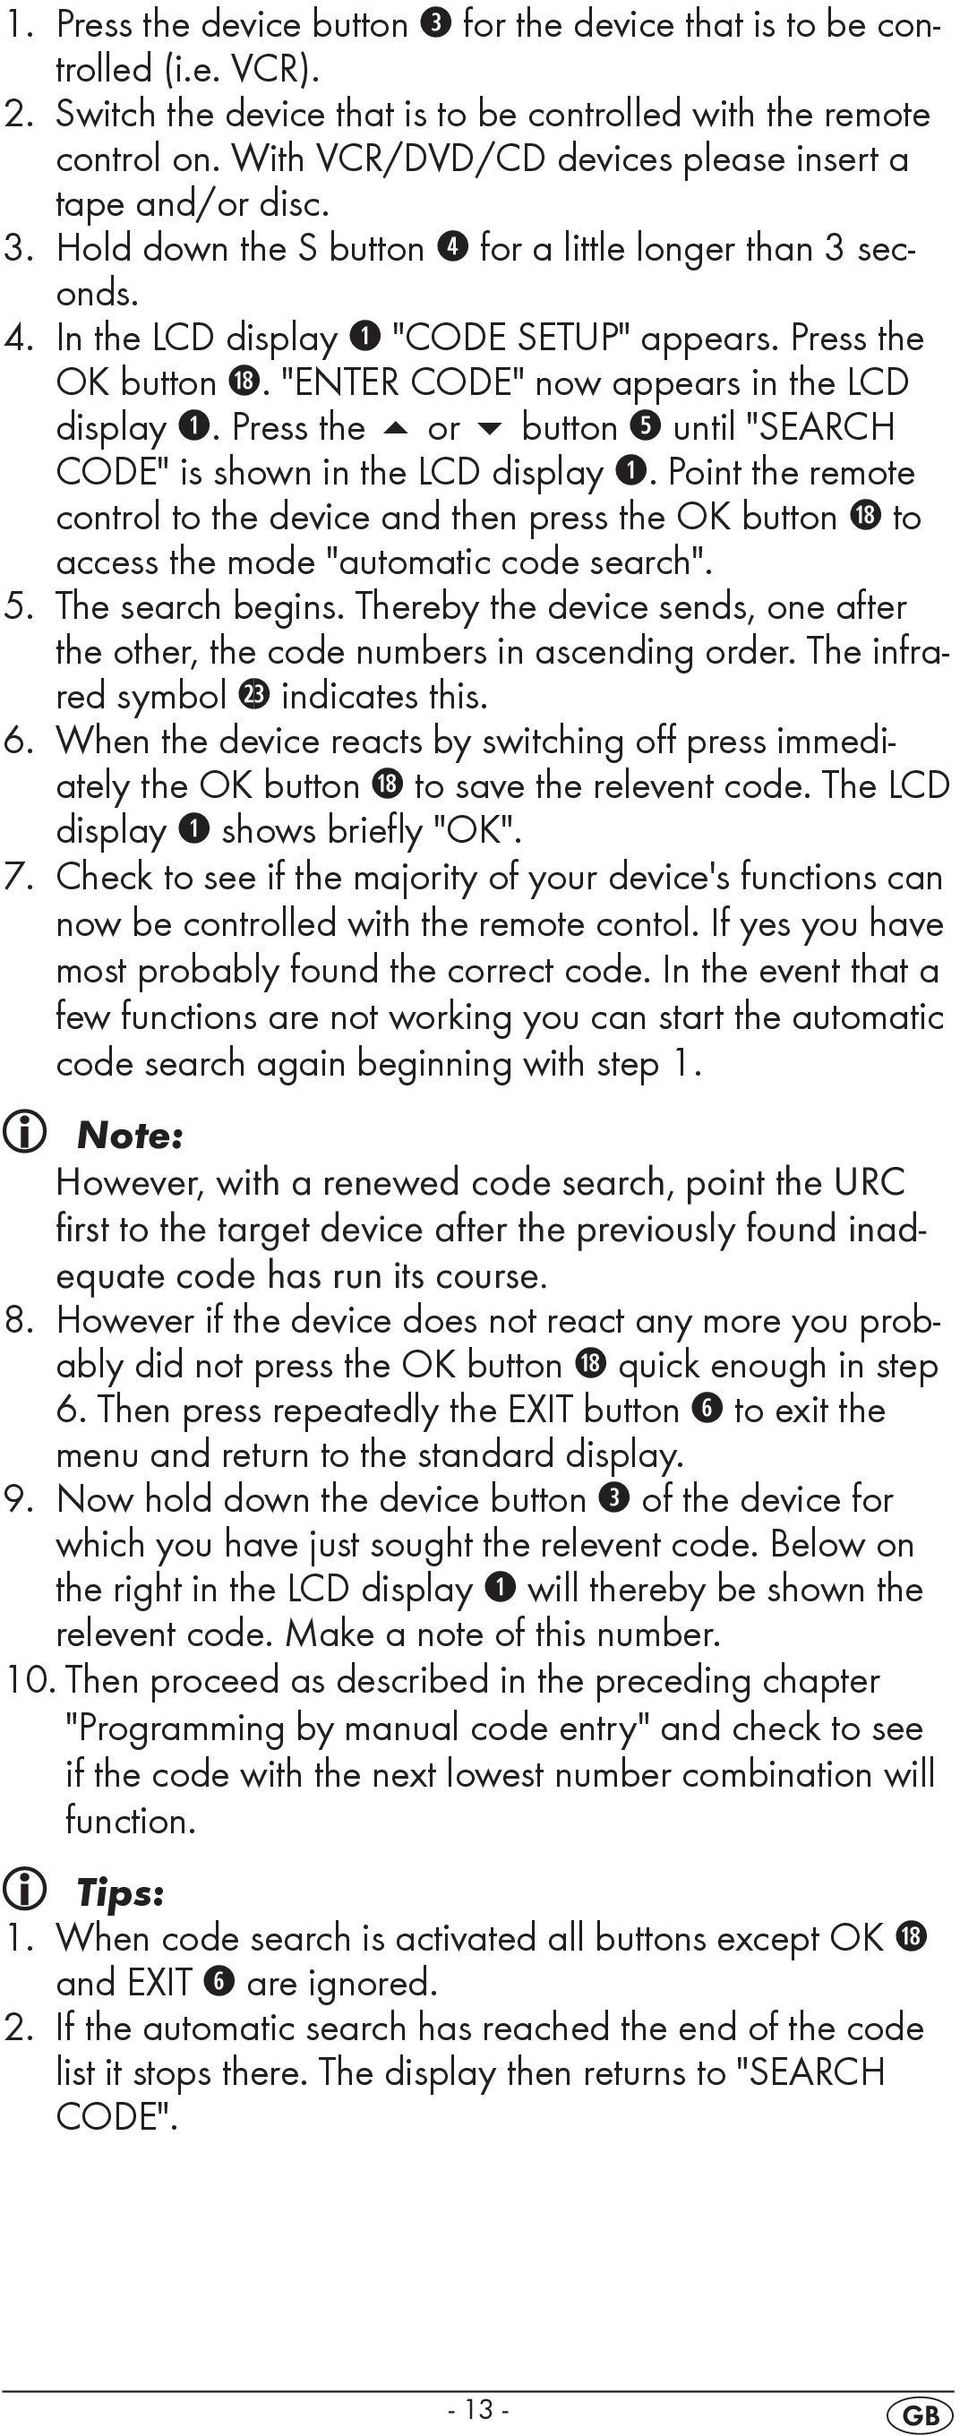 "ENTER CODE" now appears in the LCD display q. Press the or button t until "SEARCH CODE" is shown in the LCD display q.